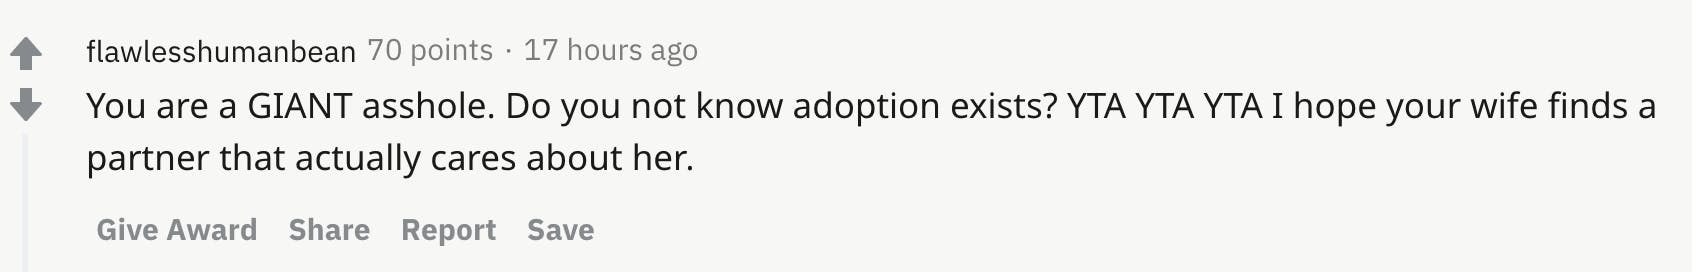 You are a GIANT asshole. Do you not know adoption exists? YTA YTA YTA I hope your wife finds a partner that actually cares about her.